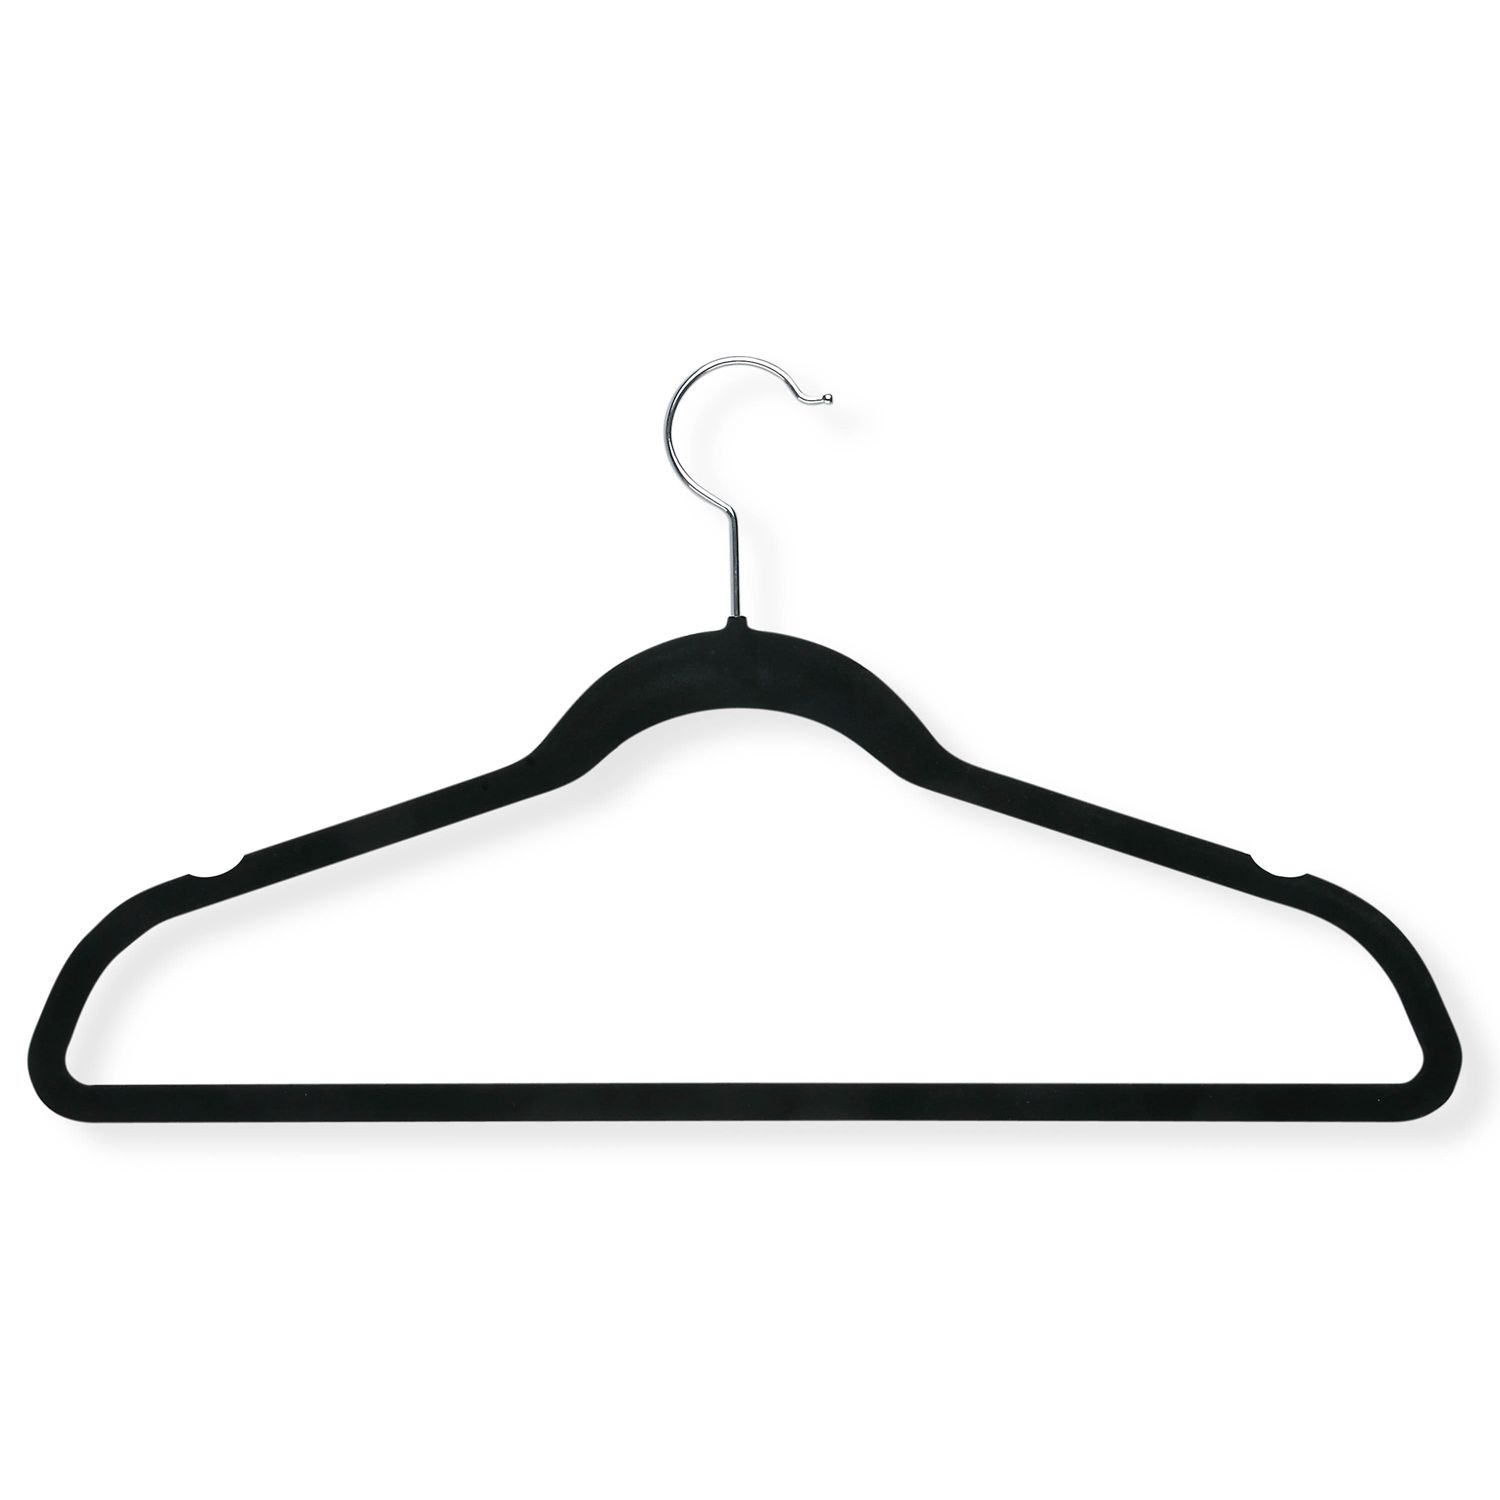 Image for Honey-Can-Do 50-pk. Flocked Suit Hangers at Kohl's.